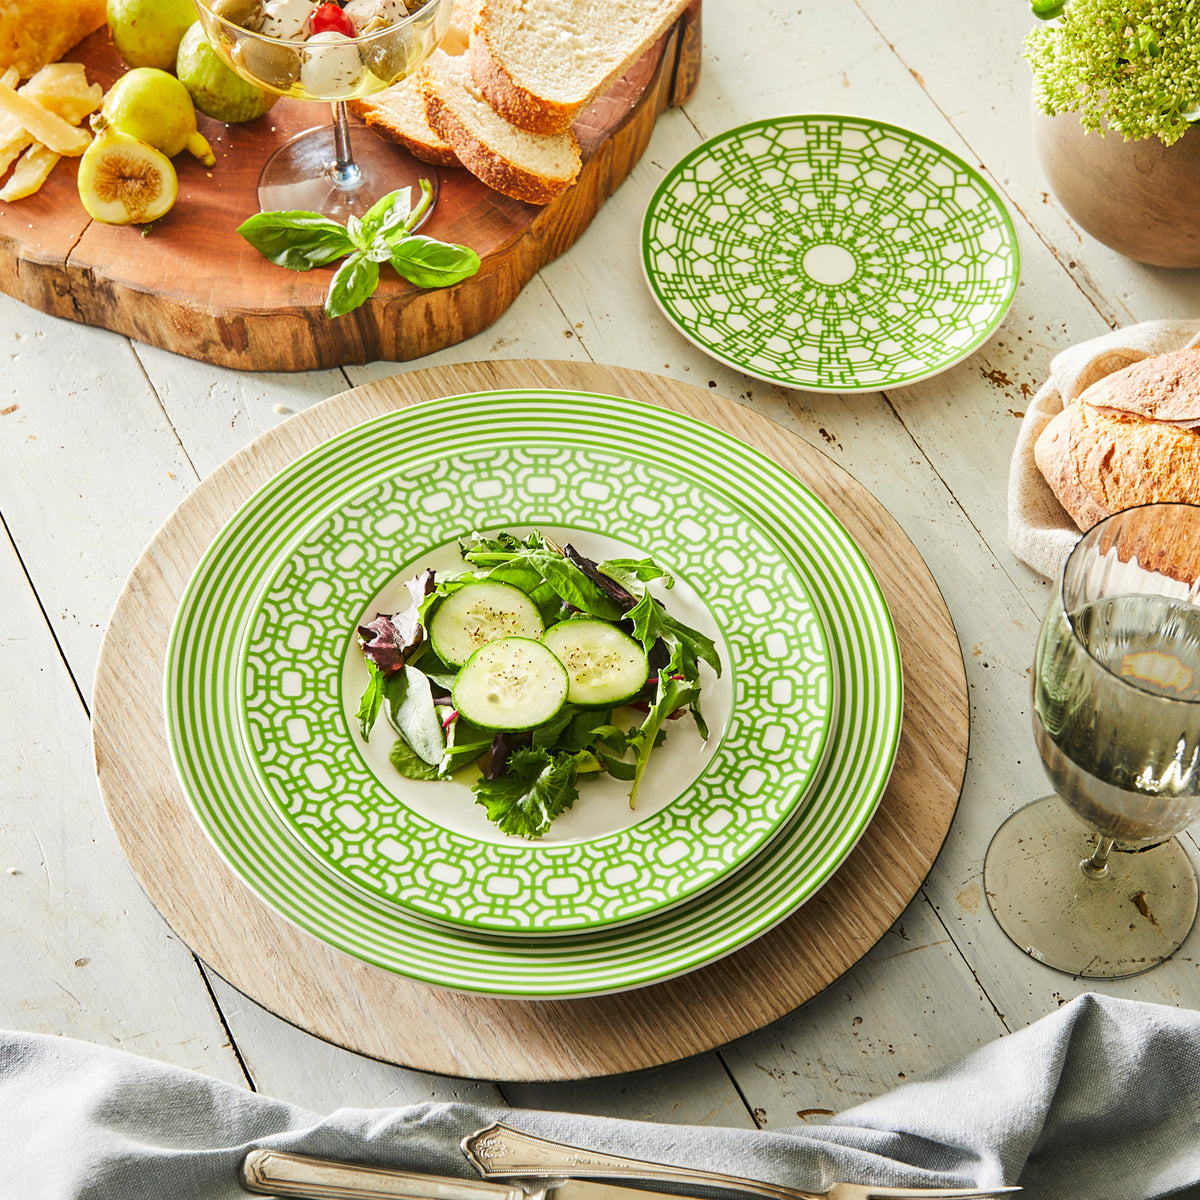 A table set with a premium porcelain Newport Garden Gate canapé plate, and a salad on a Newport Garden Gate salad plate from Caskata.